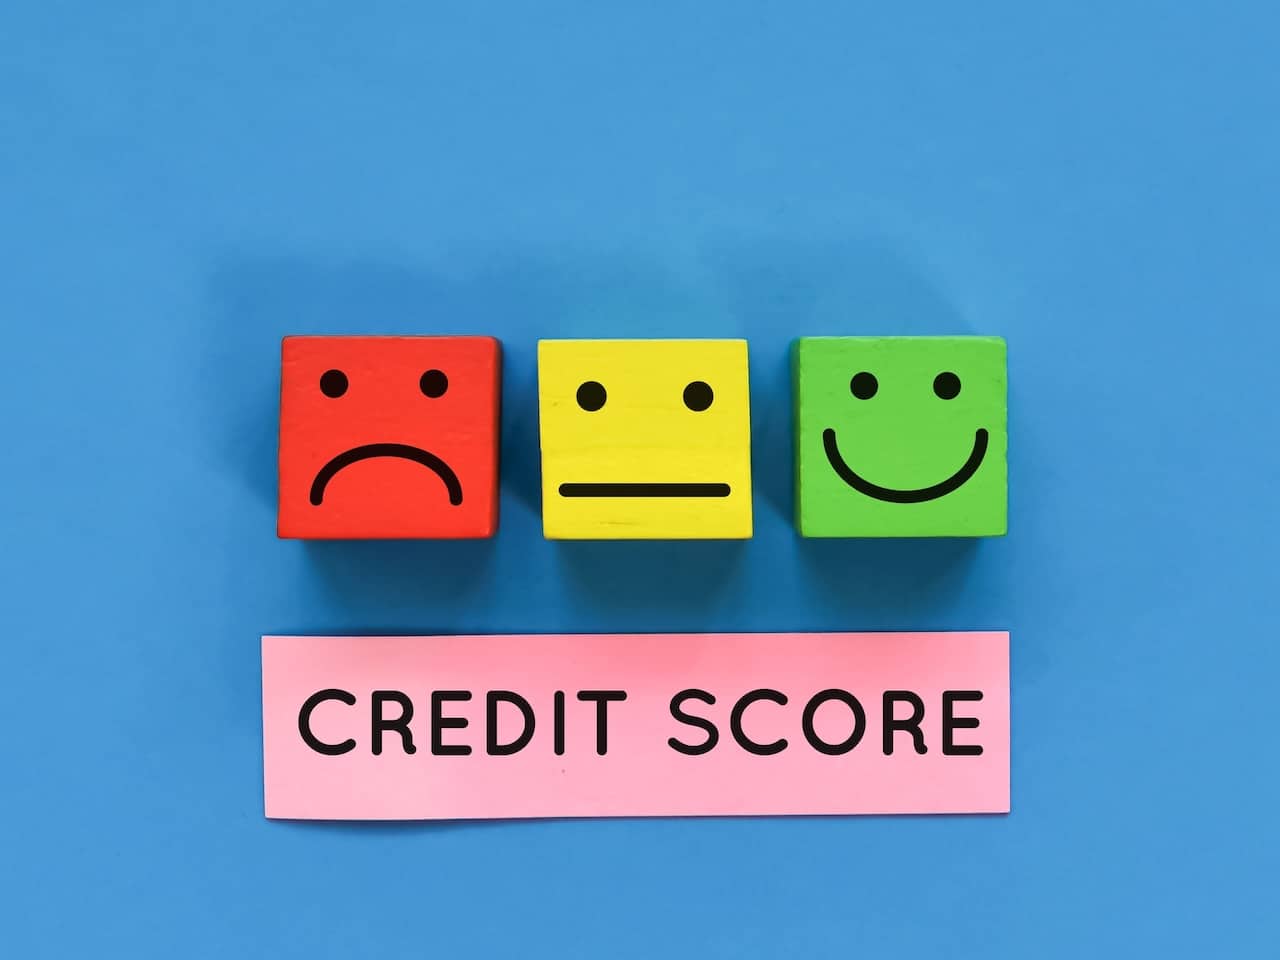 You are financially more than your credit score